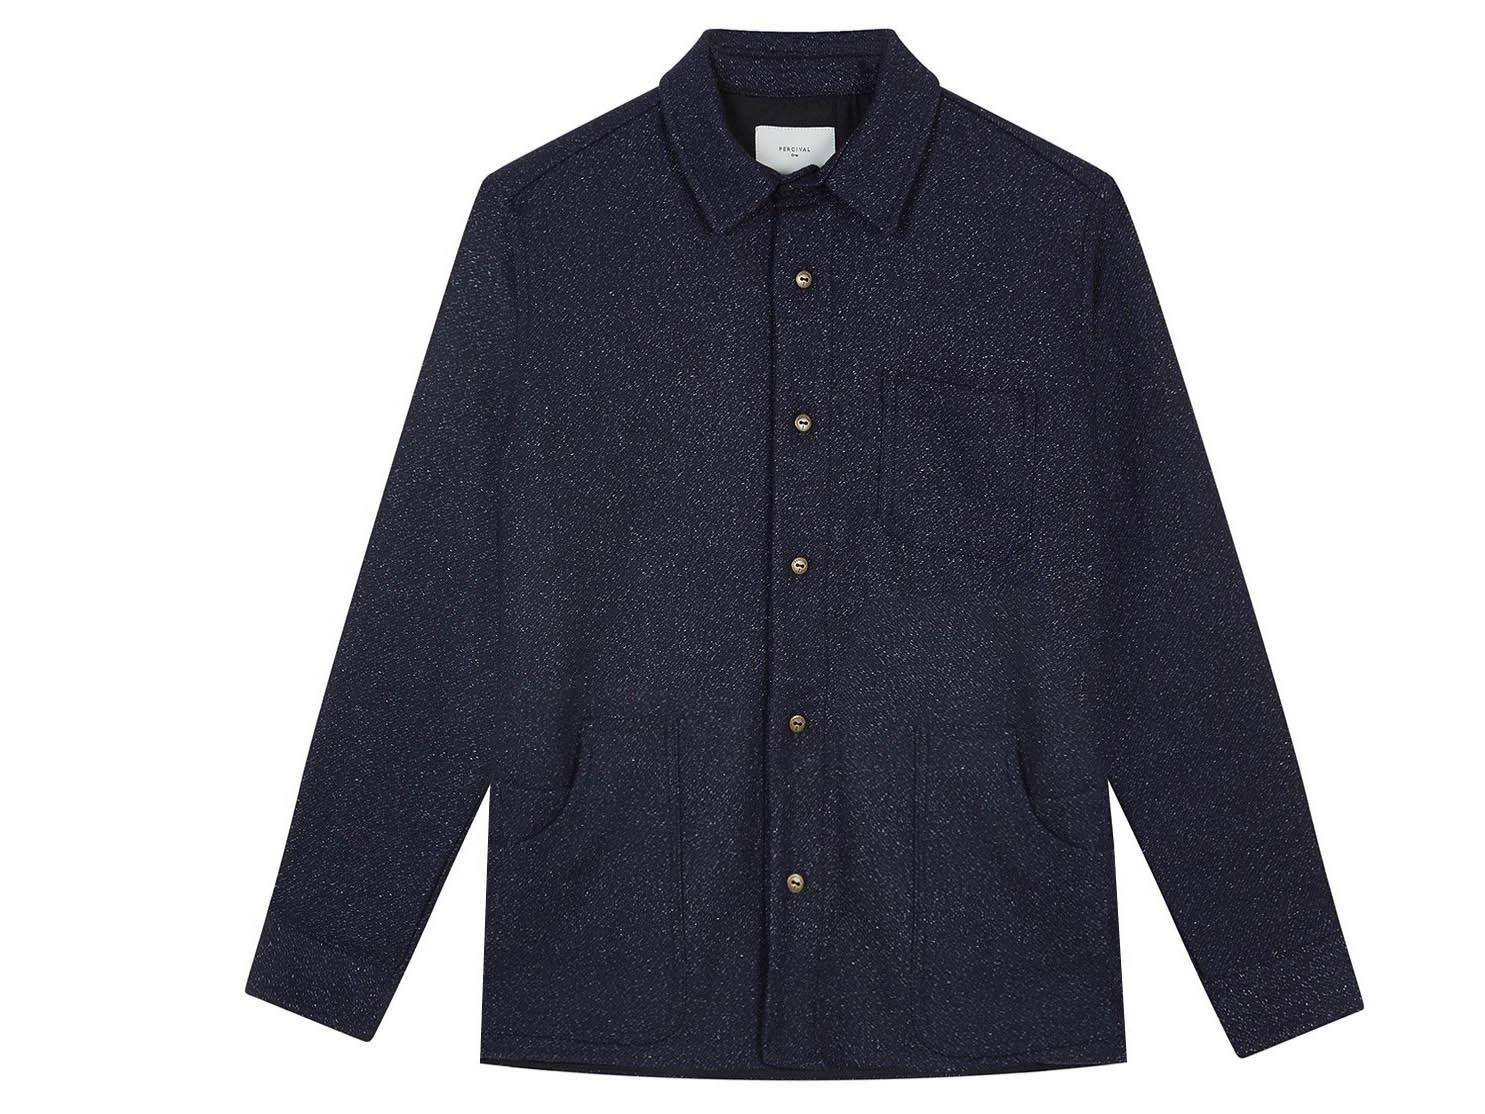 Outershirt, £159, Percival